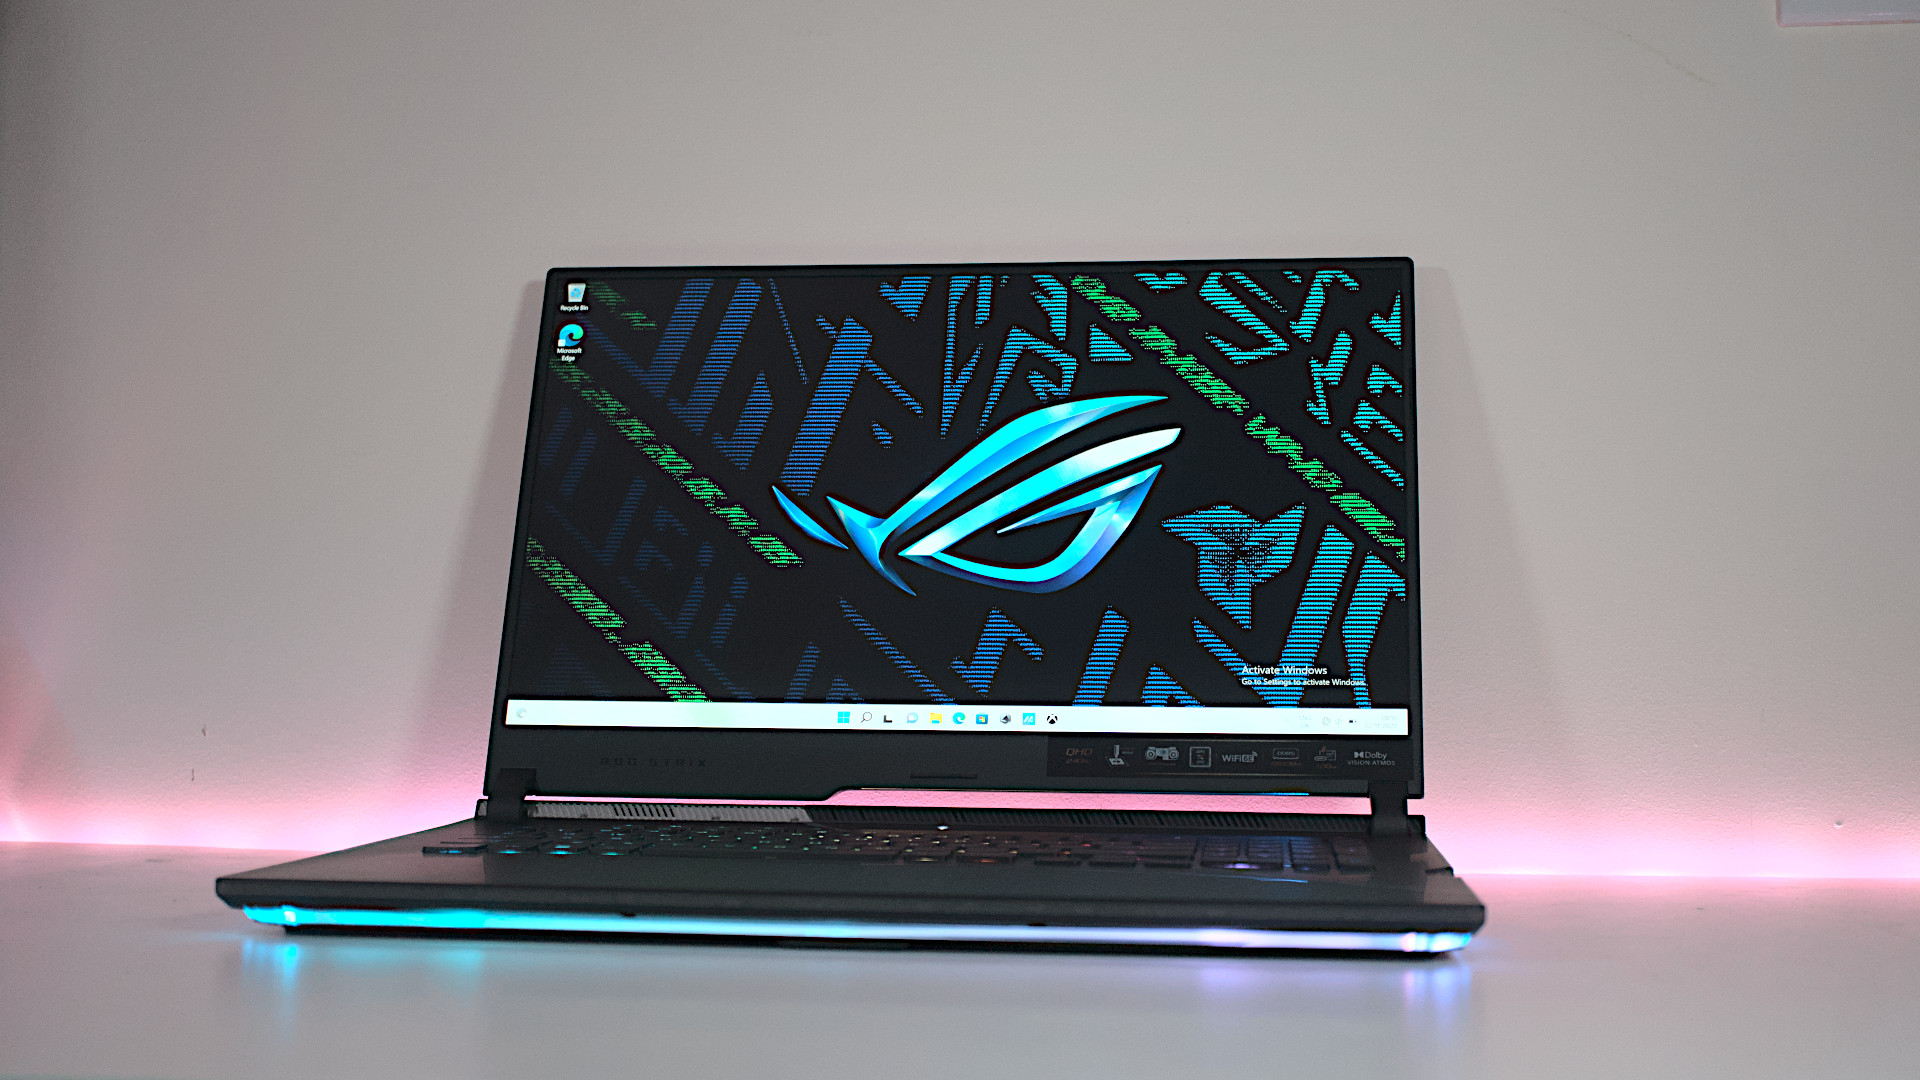 Asus Rog Strix Scar 17 Se Review The Best Gaming Laptop To Buy This Year Windows Central